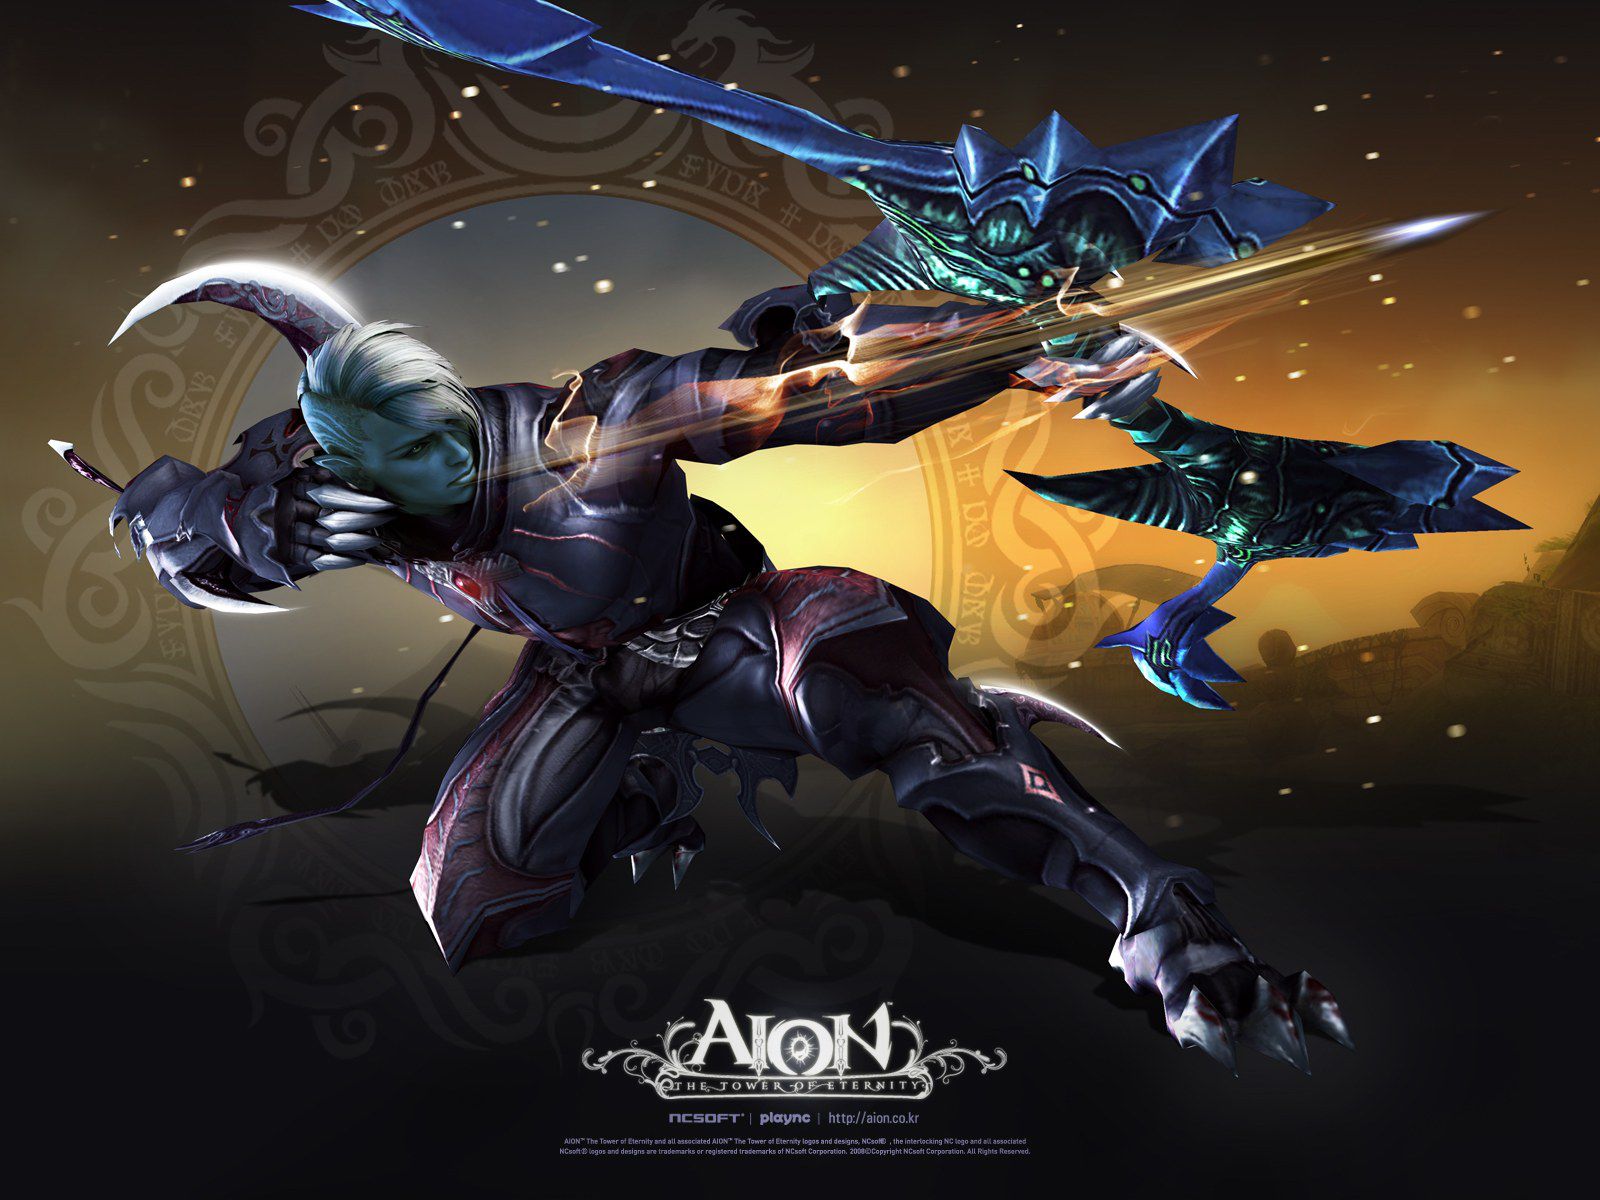 Download_Aion_Full_HD_Wallpapers-cgfrog_com_16